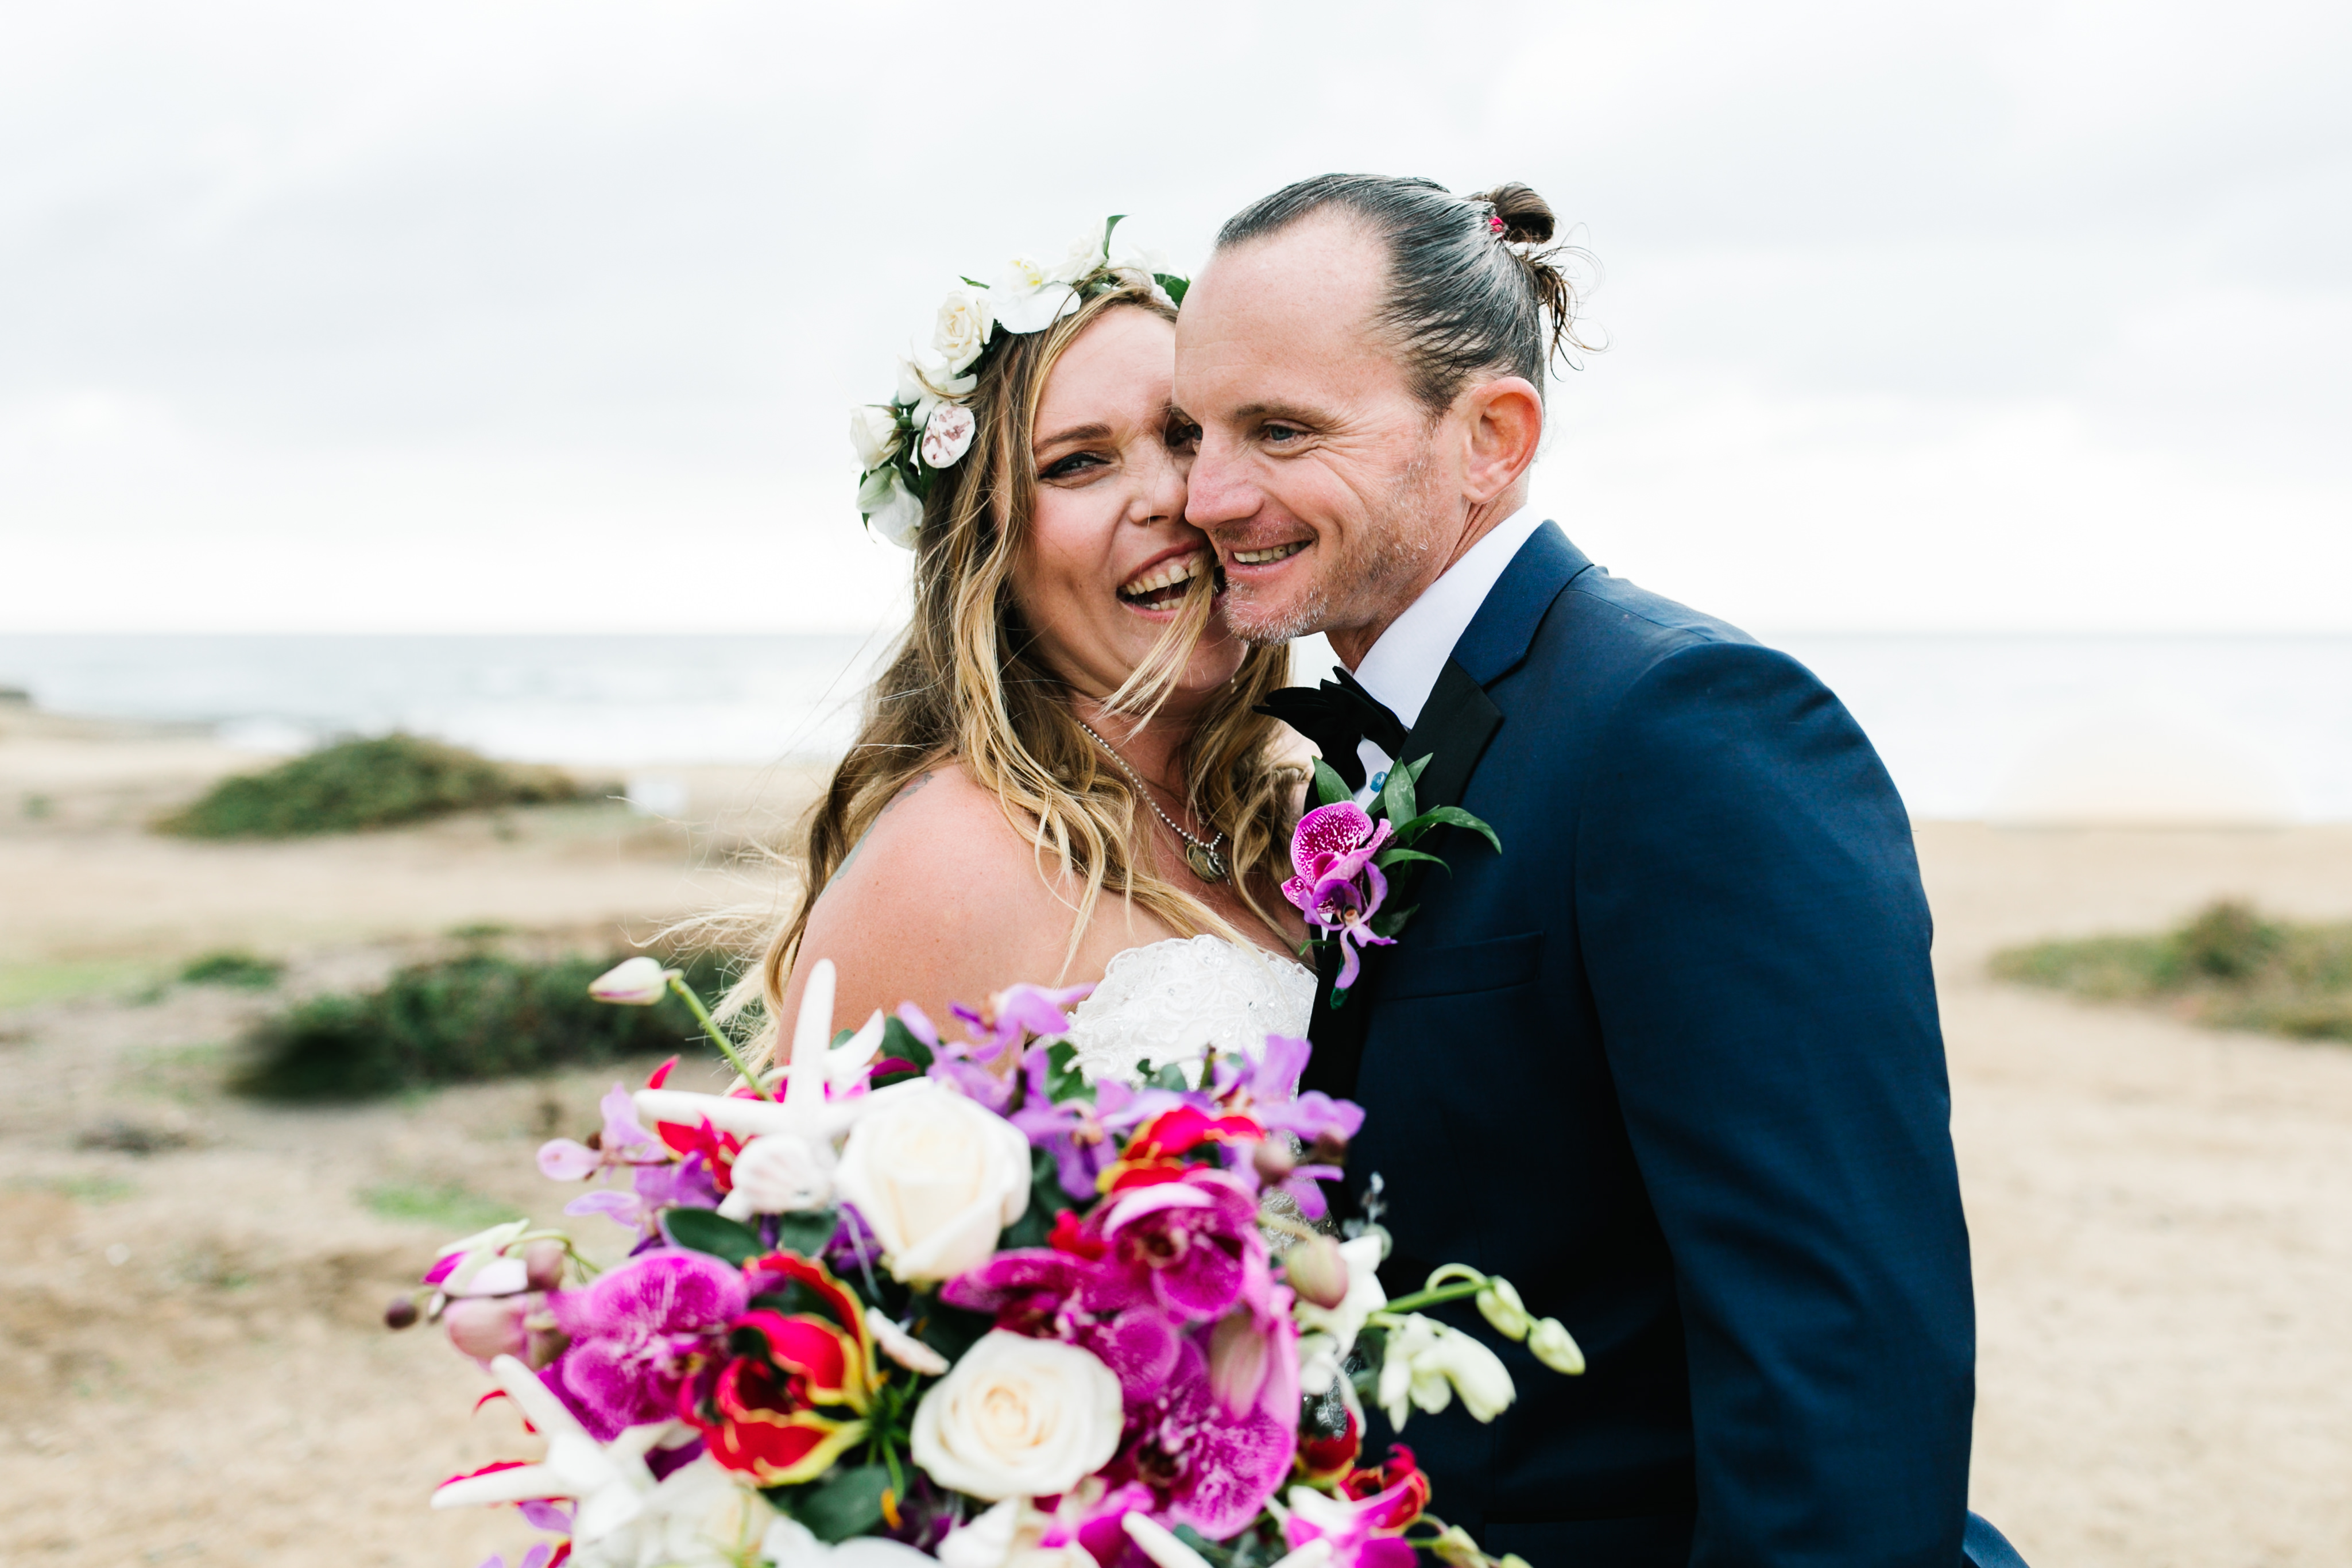 bride and groom excited at beach at sunset cliffs wedding